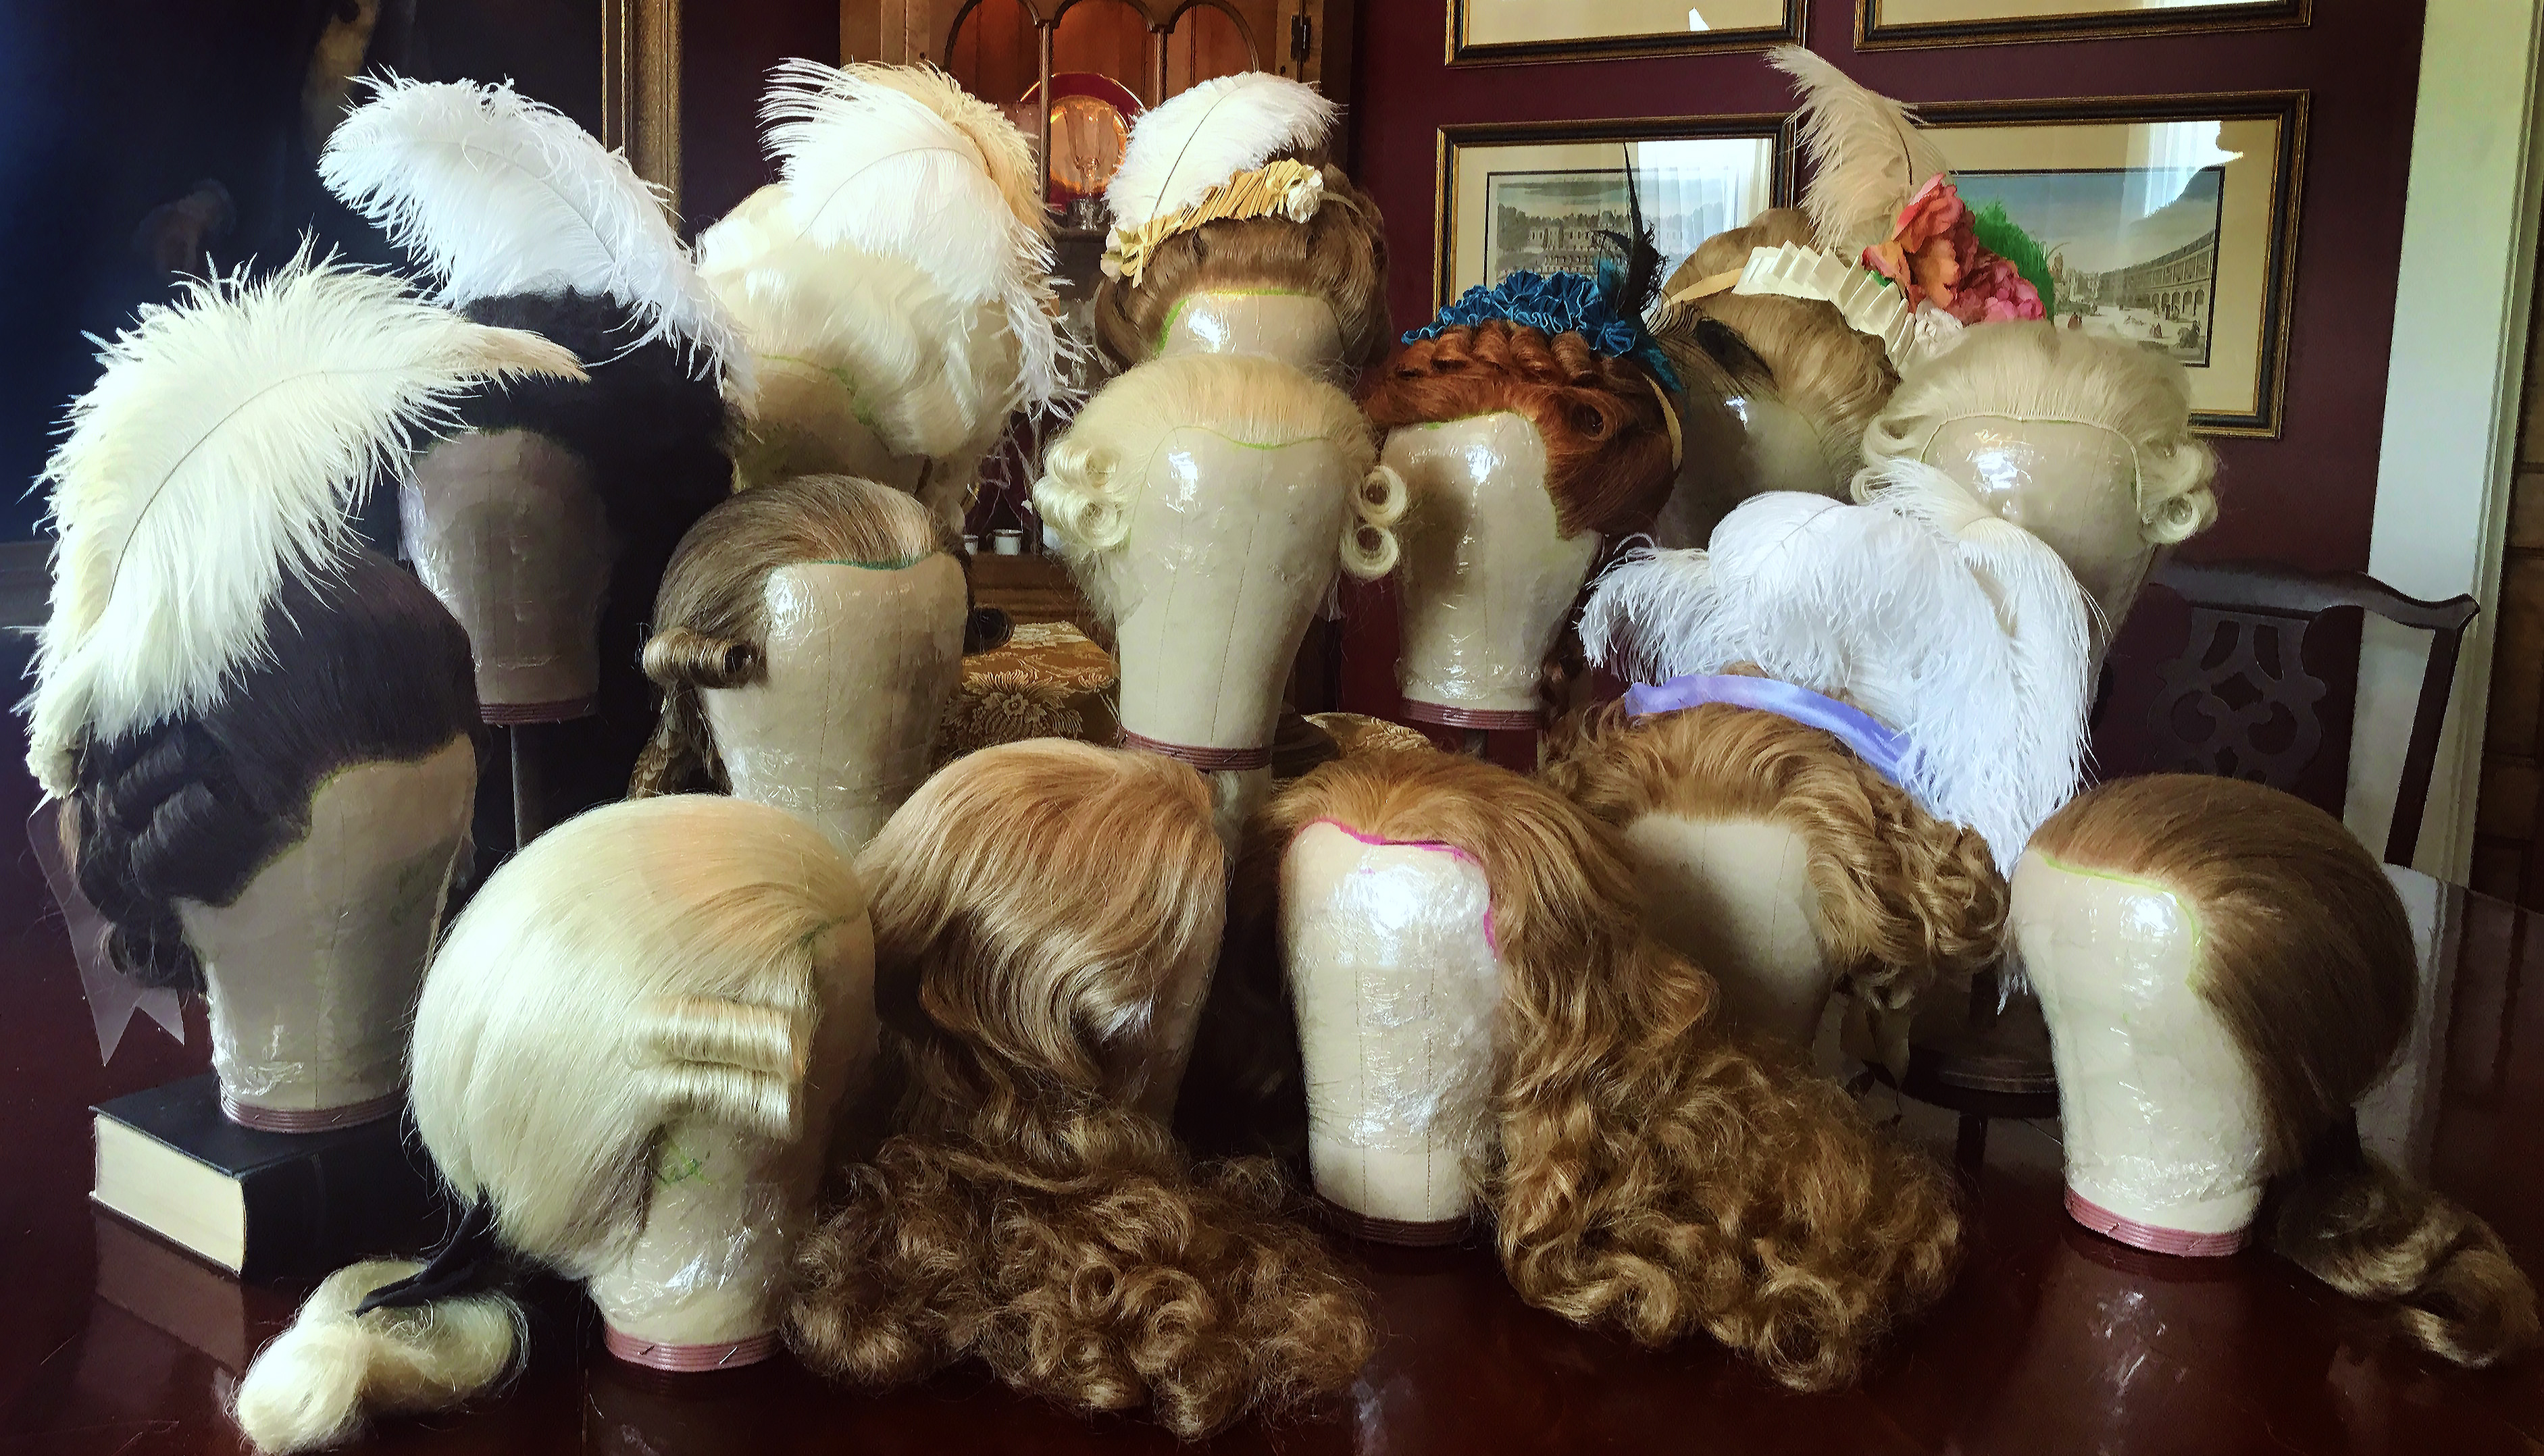 custom 18th century wigs for the masked ball